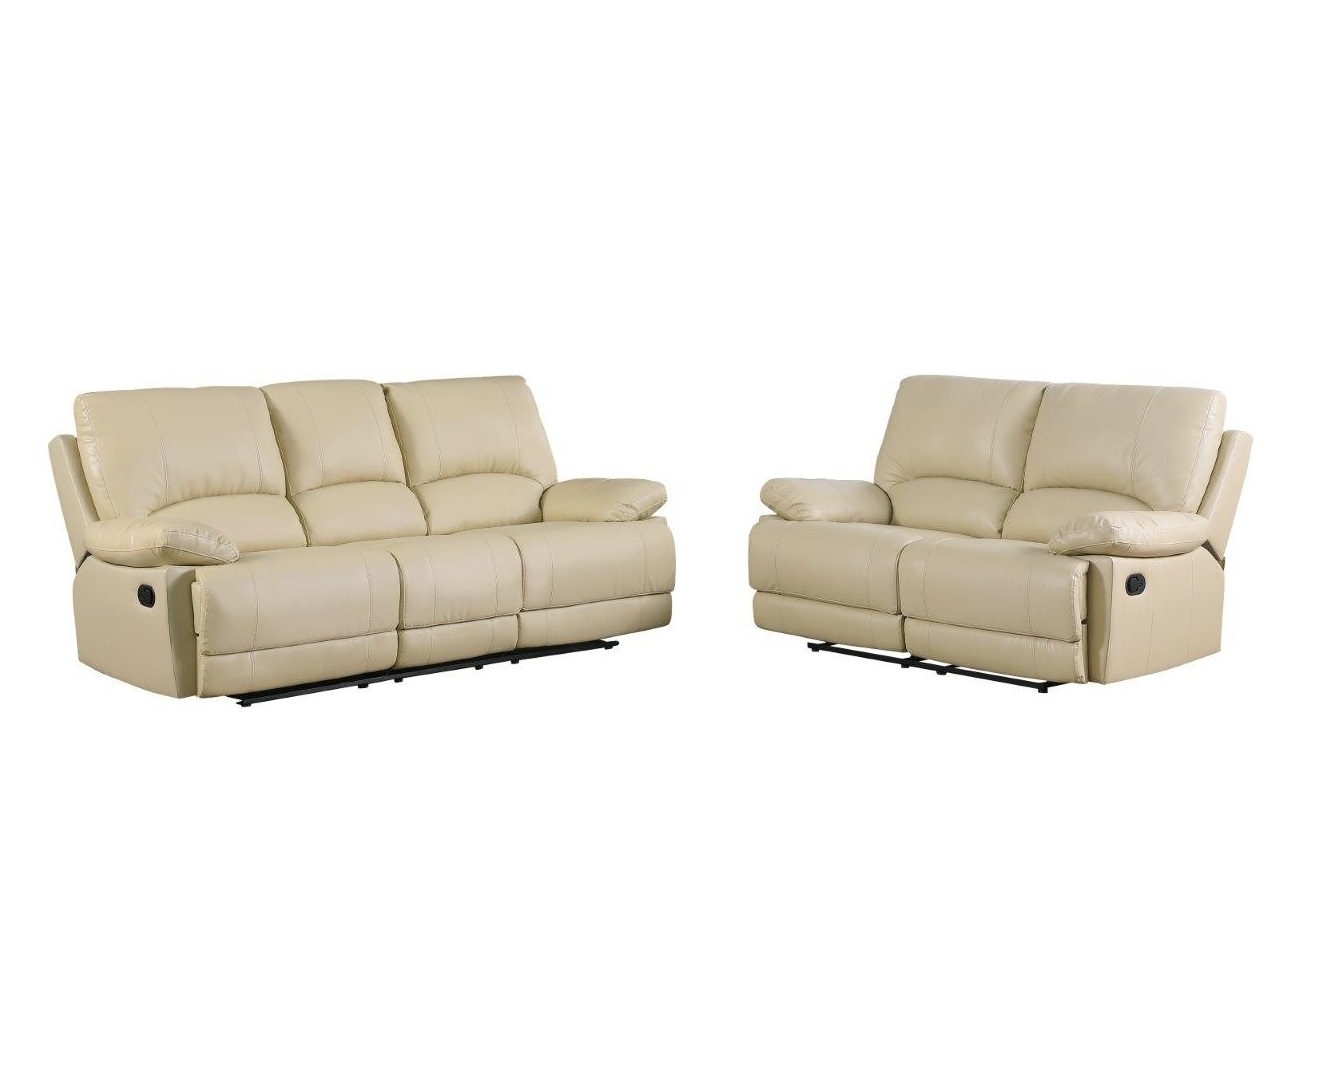 Two Piece Indoor Beige Faux Leather Five Person Seating Set-343900-1